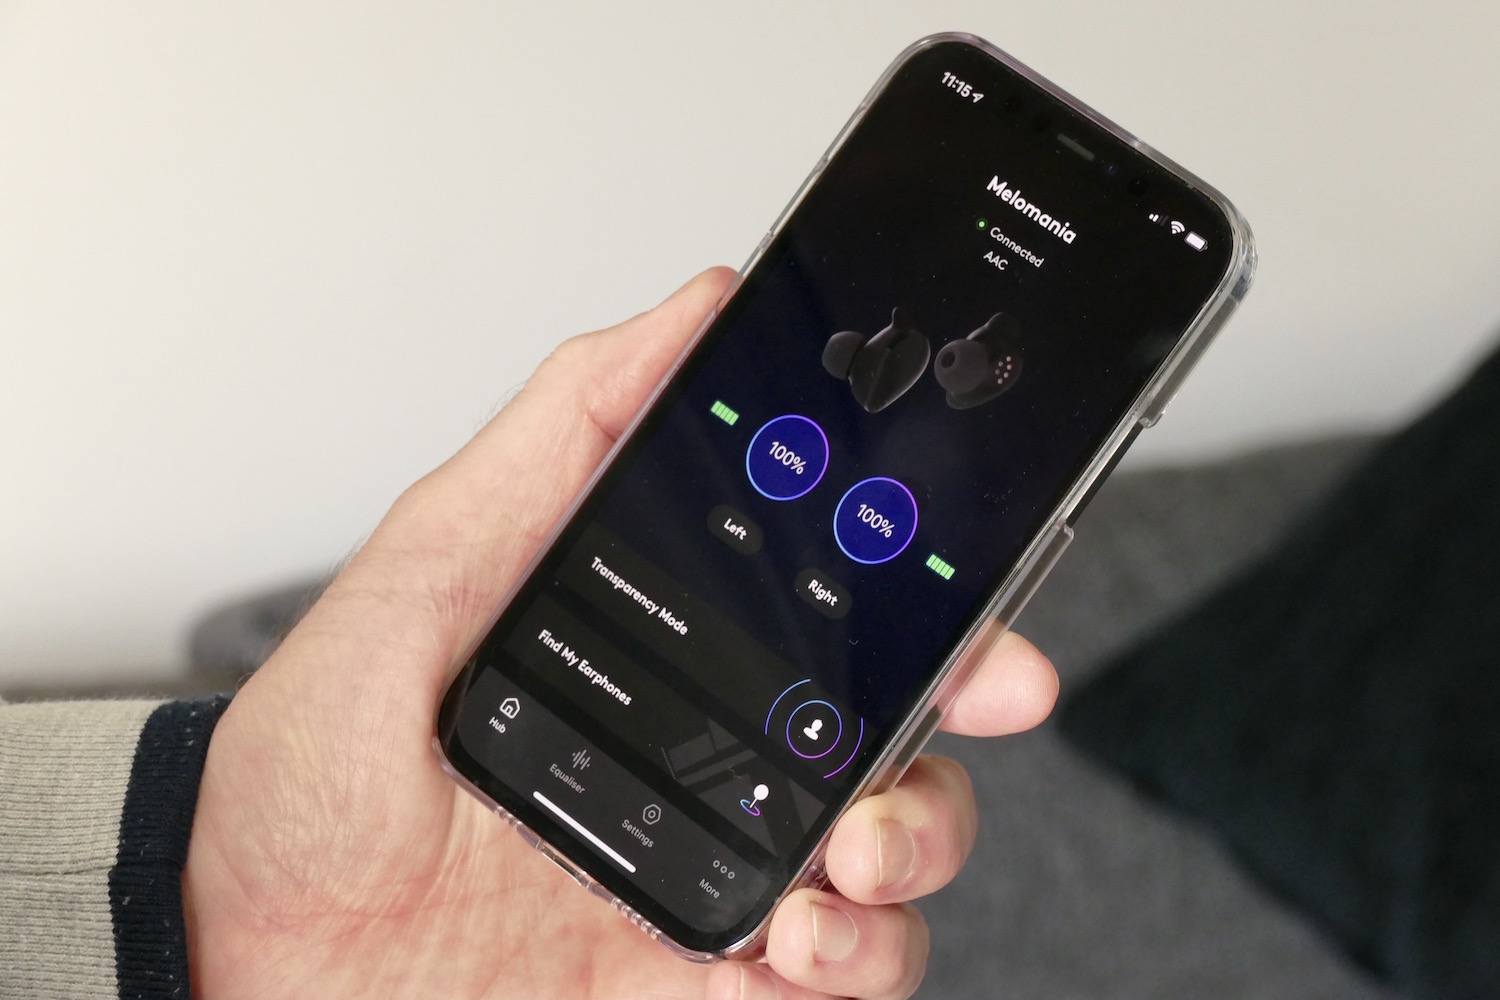 cambridge audio melomania touch review app battery life